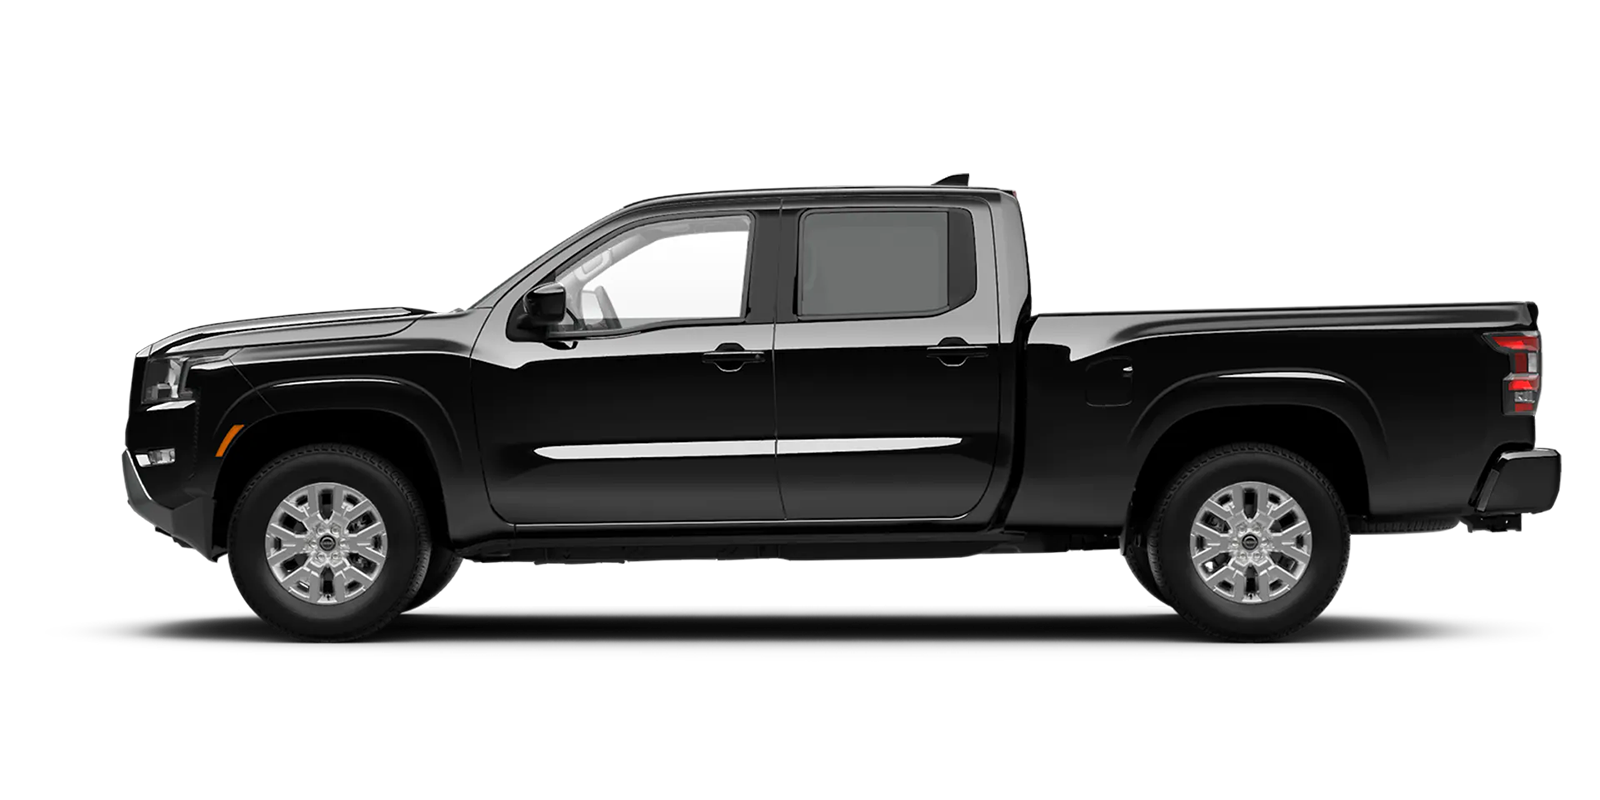 2022 Frontier Crew Cab Long Bed SV 4x4 in Super Black | King Windward Nissan in Kaneohe HI